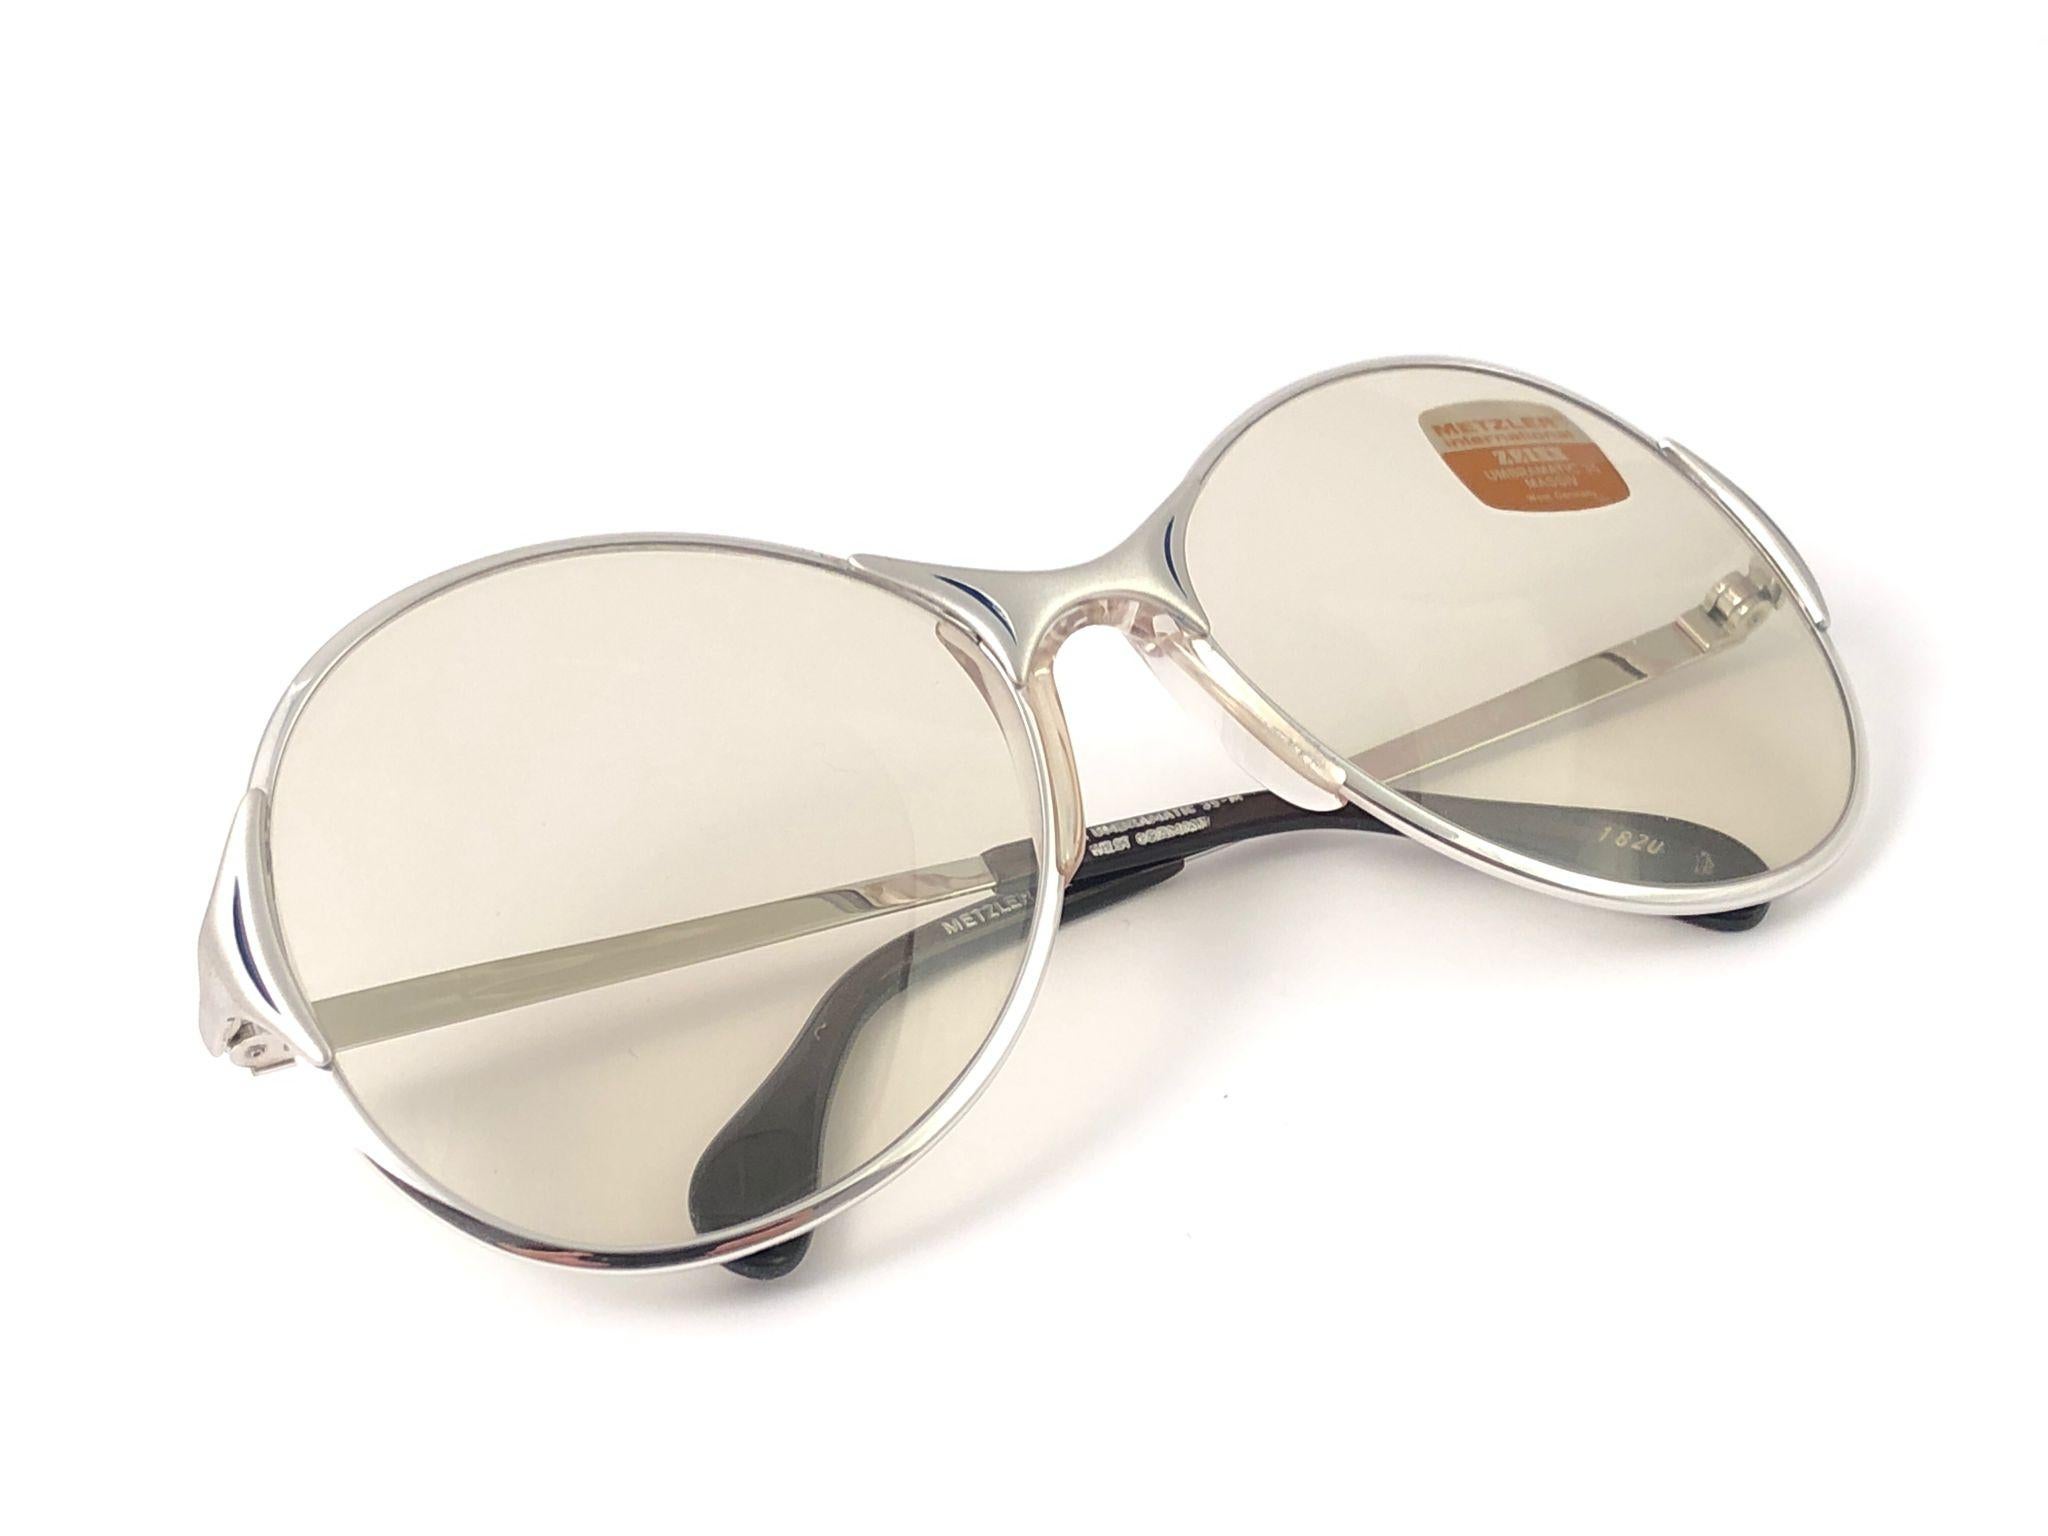 New Vintage Metzler Zeiss Umbramatic Butterfly Sunglasses West Germany 1980's For Sale 6